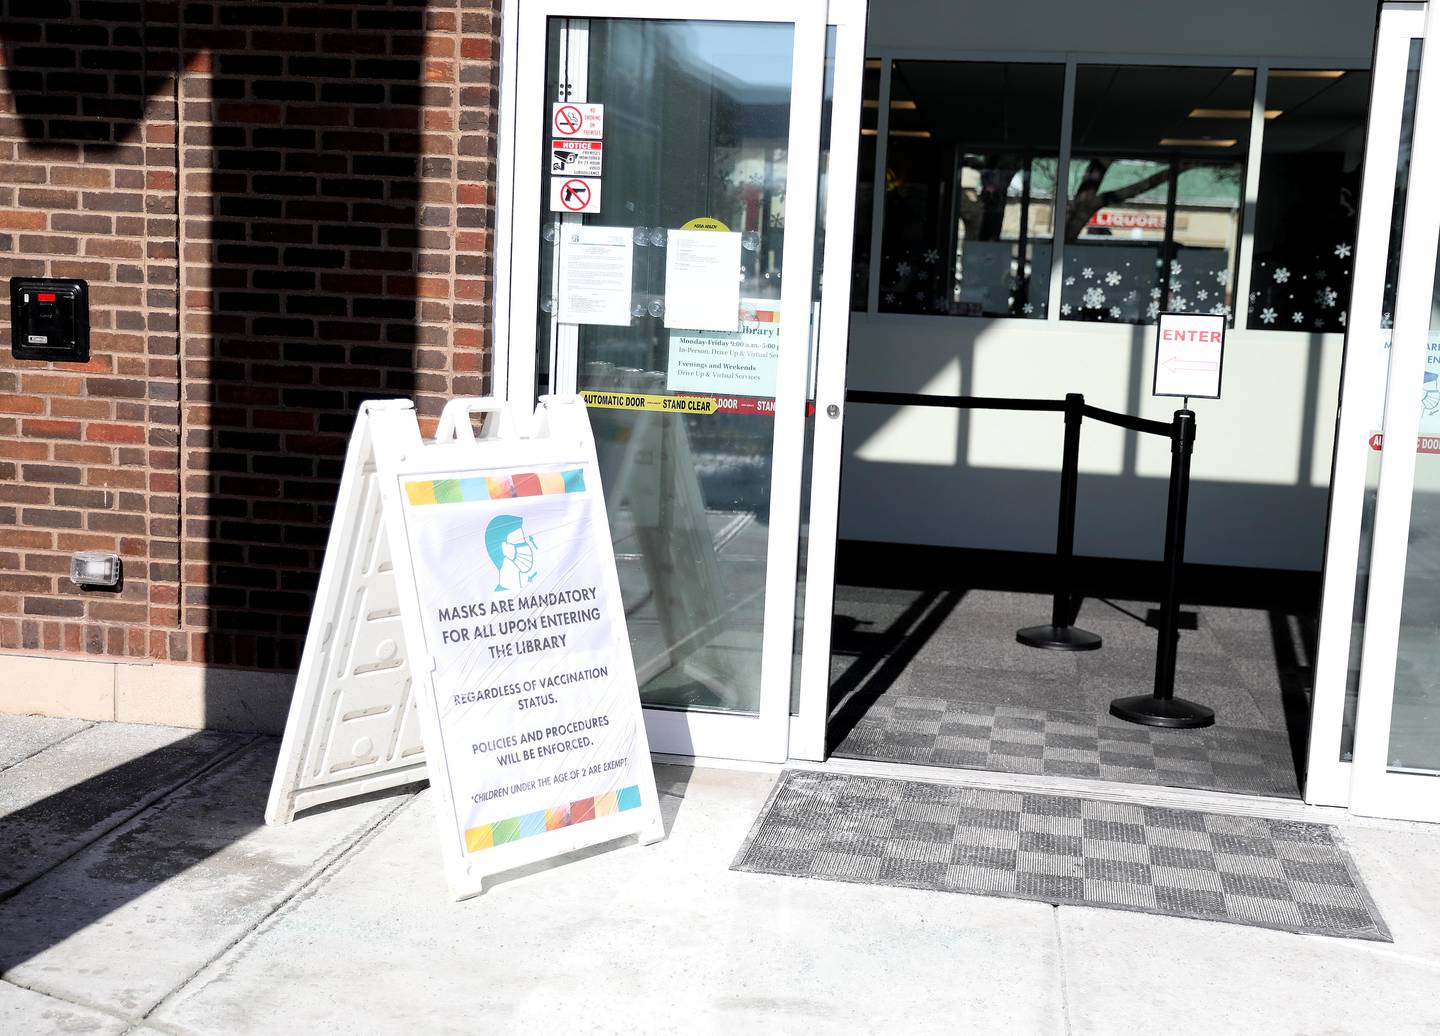 The St. Charles Public Library reopened for in-person visits on Monday, Feb. 7, 2022 after being closed for more than two weeks after threats were made against employees for following the state’s indoor mask requirements.